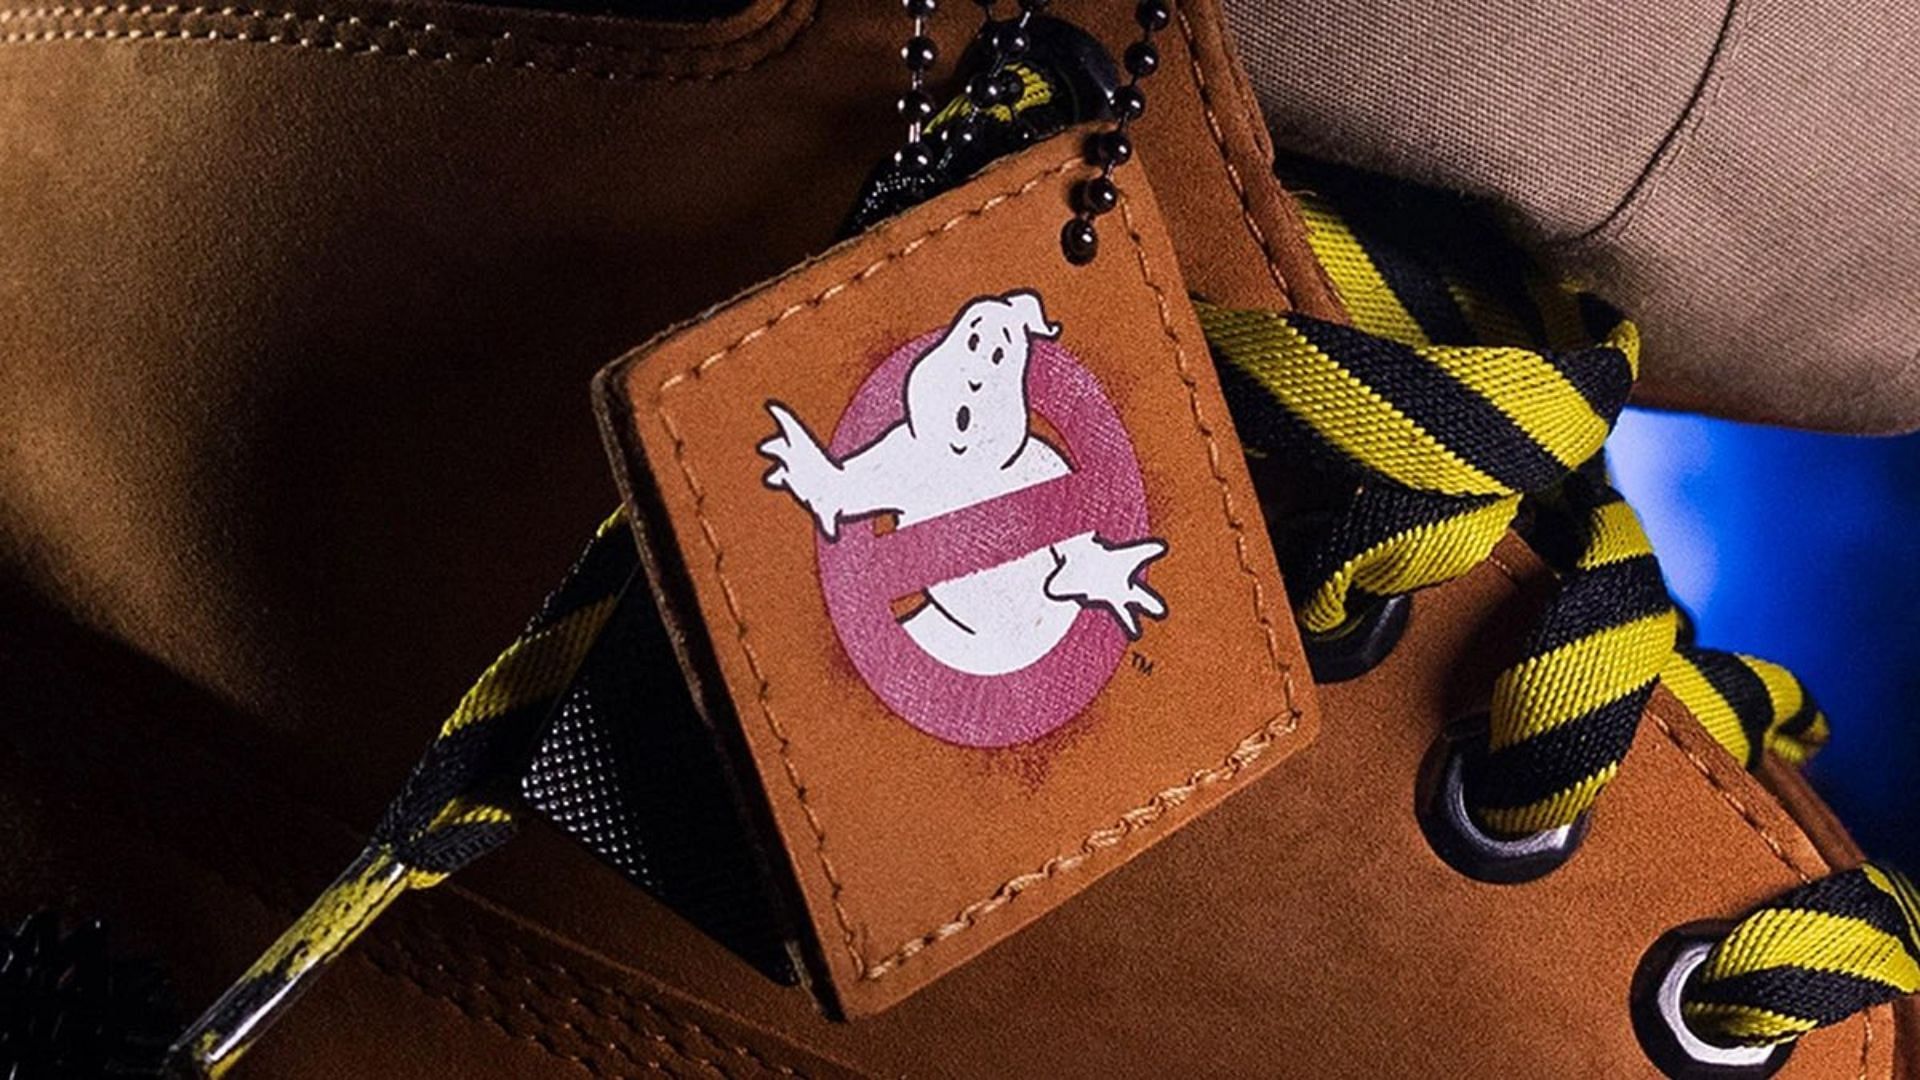 Ghostbusters x Timberland Collection